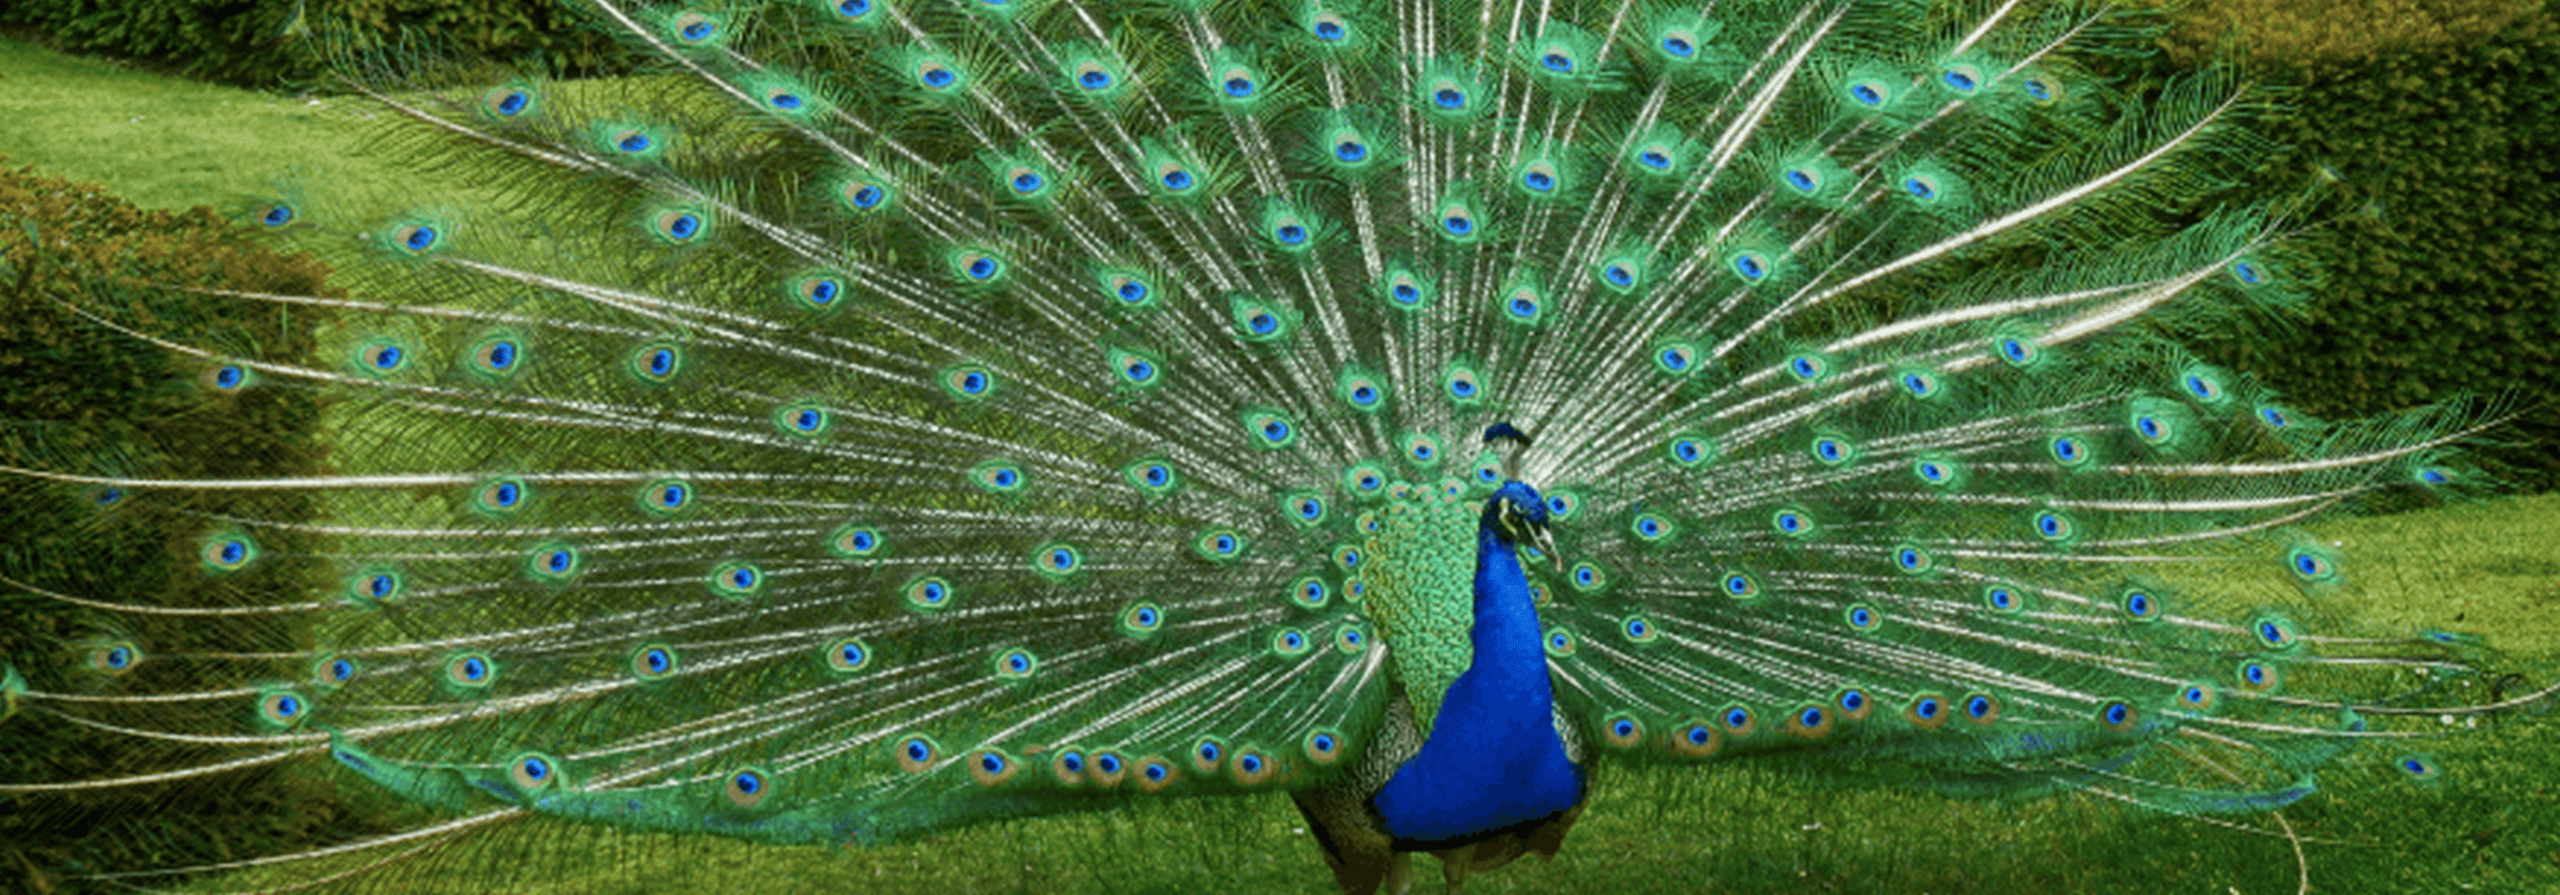 A beautiful peacock spreads its feathers at the Saskatoon Forestry Farm and Zoo in Silverspring Saskatoon